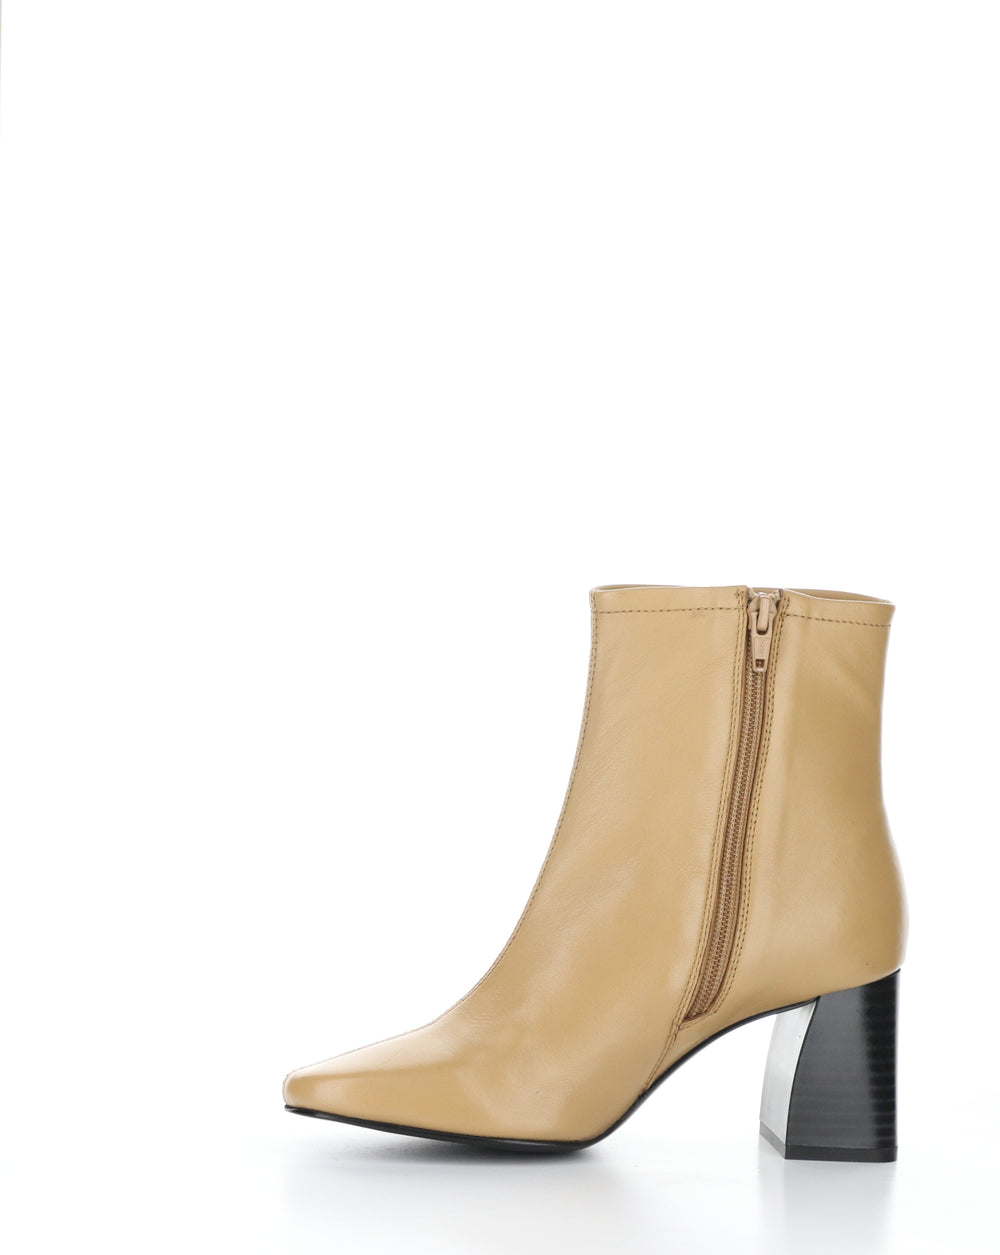 TAGUS CAMEL Pointed Toe Boots